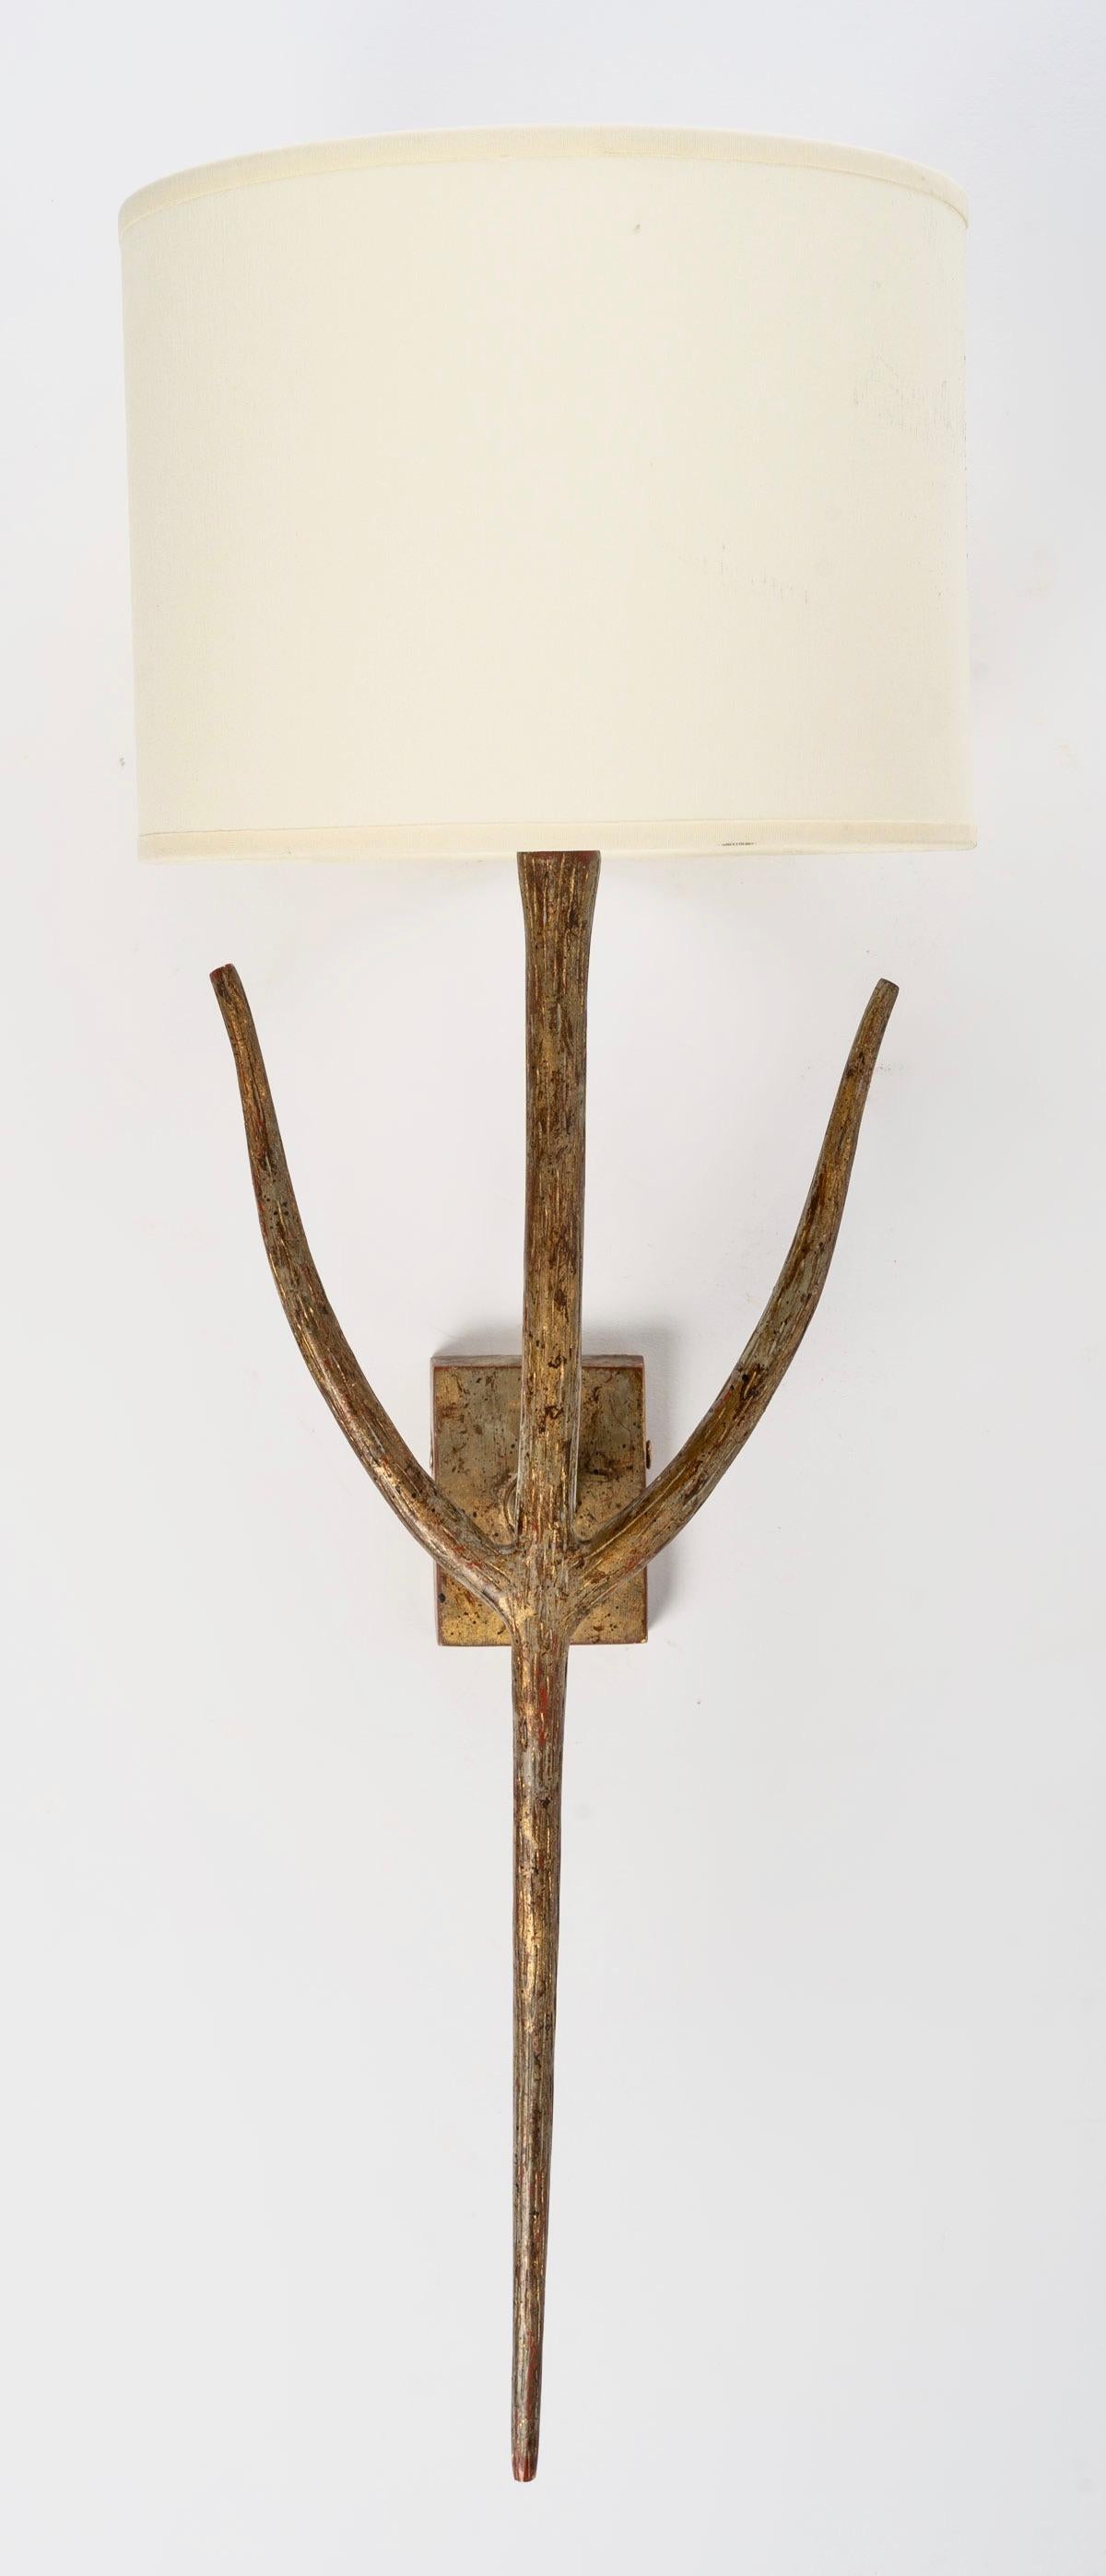 The wall lights are in bronze with a nuanced patina imitating a ribbed branch.
Composed of a luminous central arm adorned with two small branches on either side of the wall lamp and dressed in an
Off-white cylindrical shade.
The central arm rests on